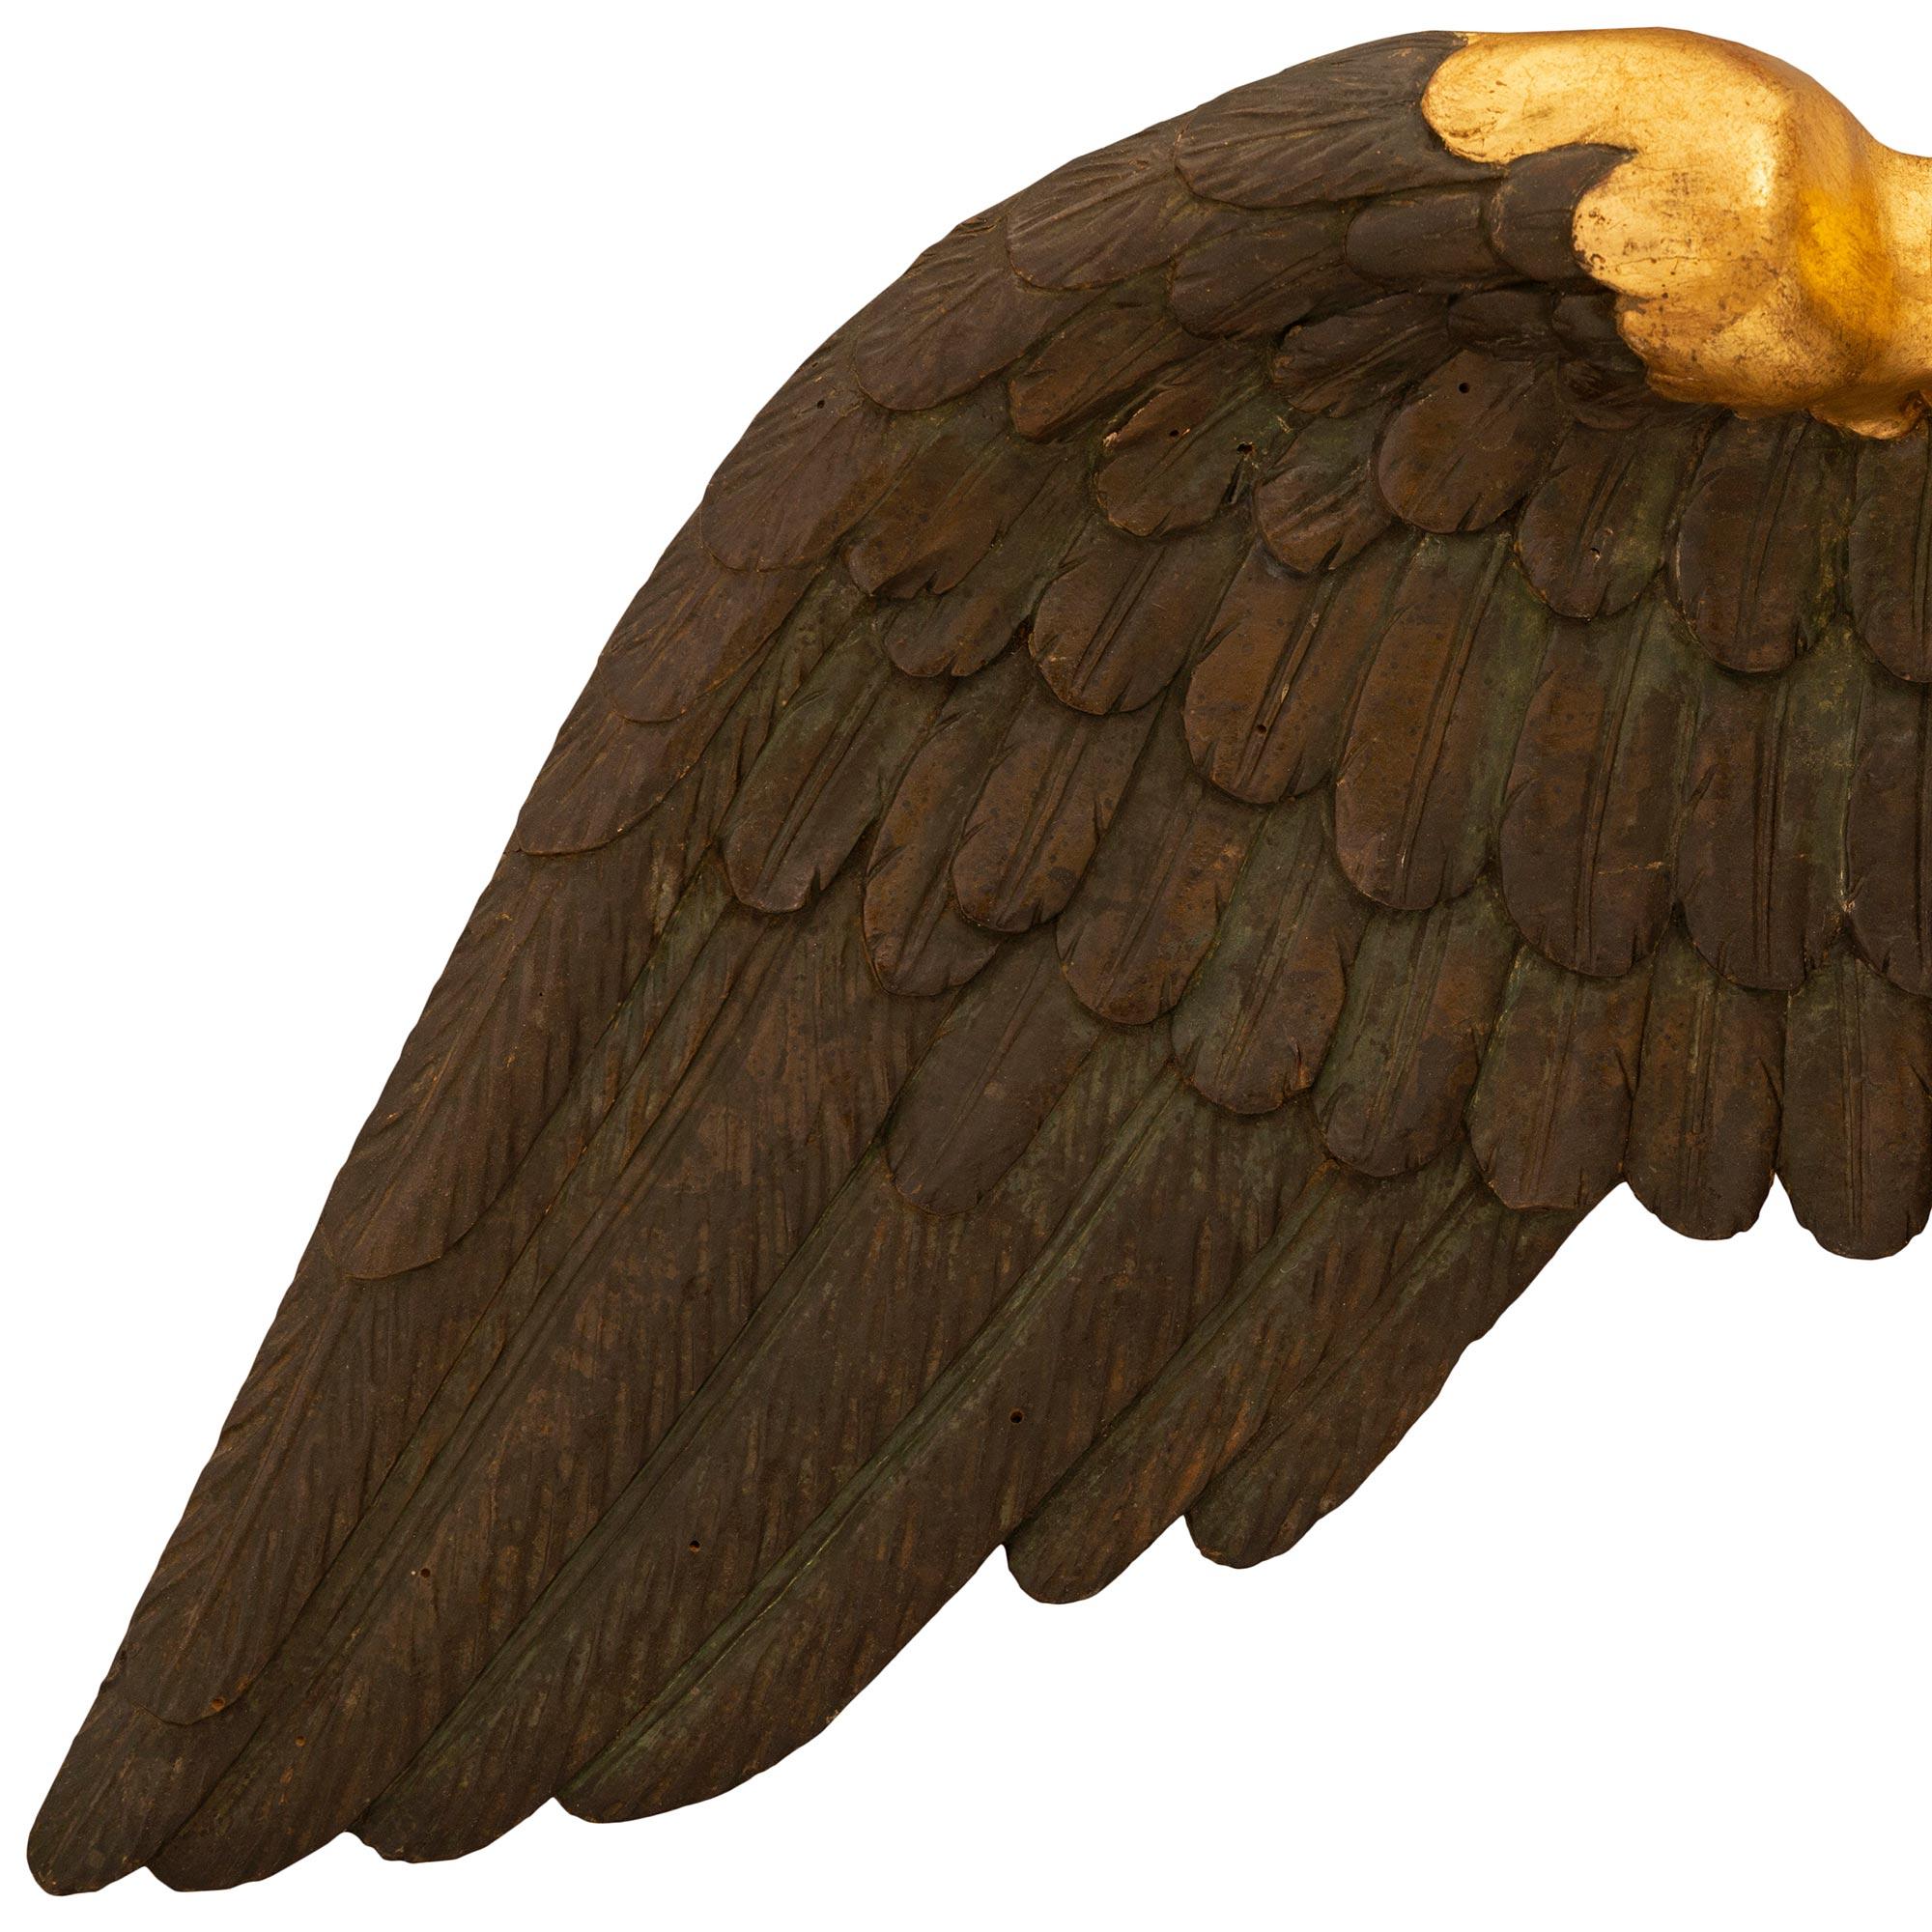 French 19th Century 1st Empire Period Giltwood and Polychrome Eagle Wall Decor For Sale 1